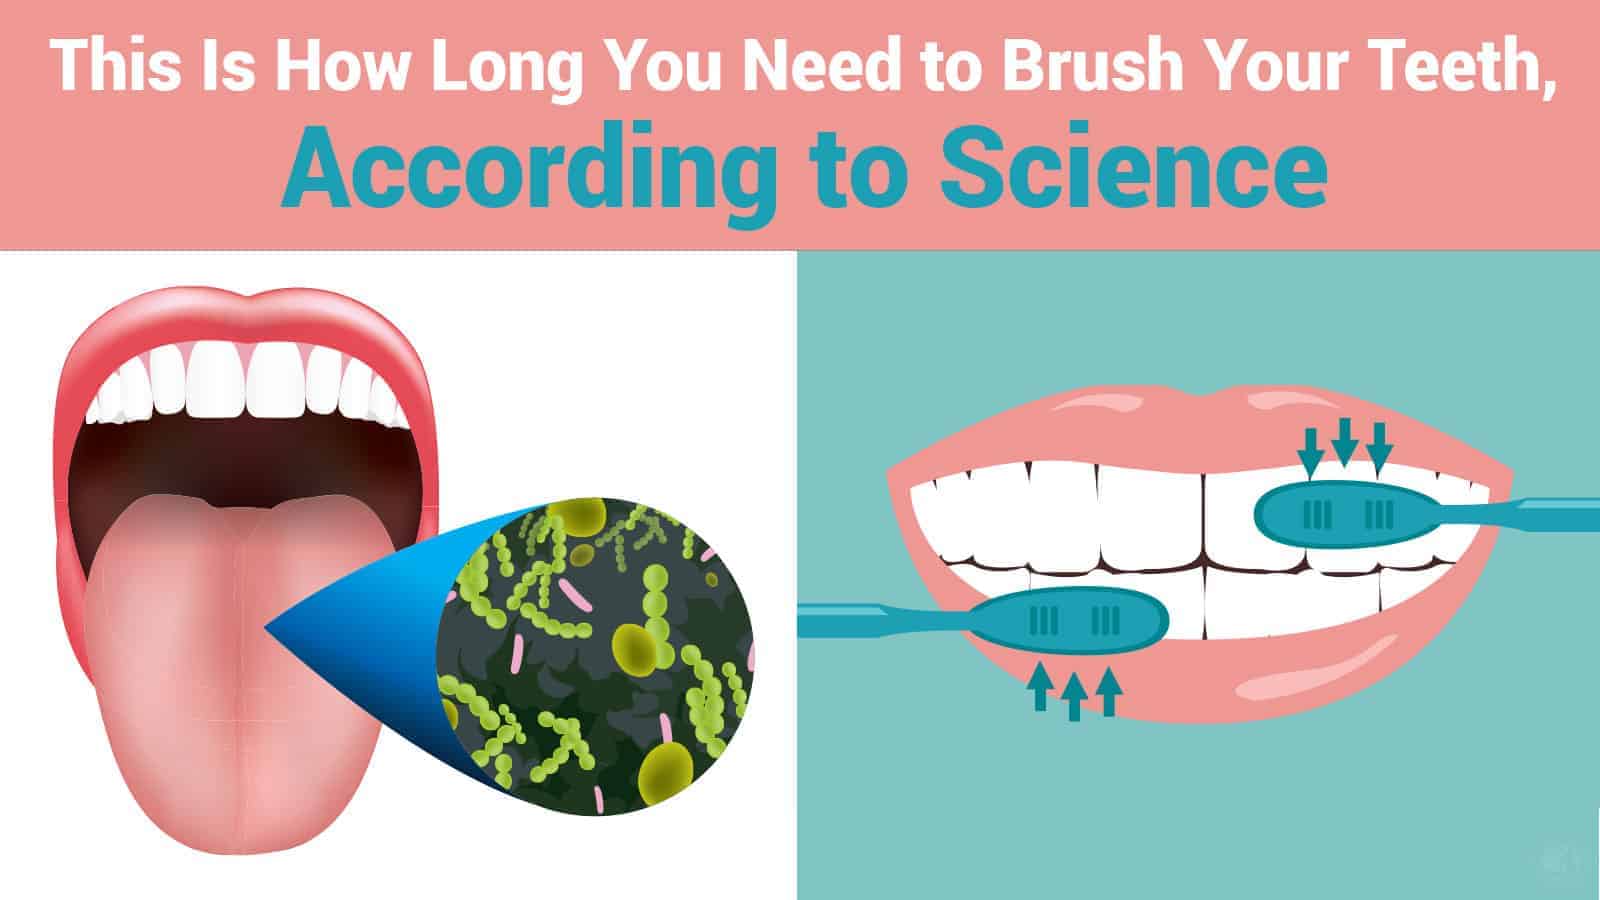 This Is How Long You Need to Brush Your Teeth, According to Science